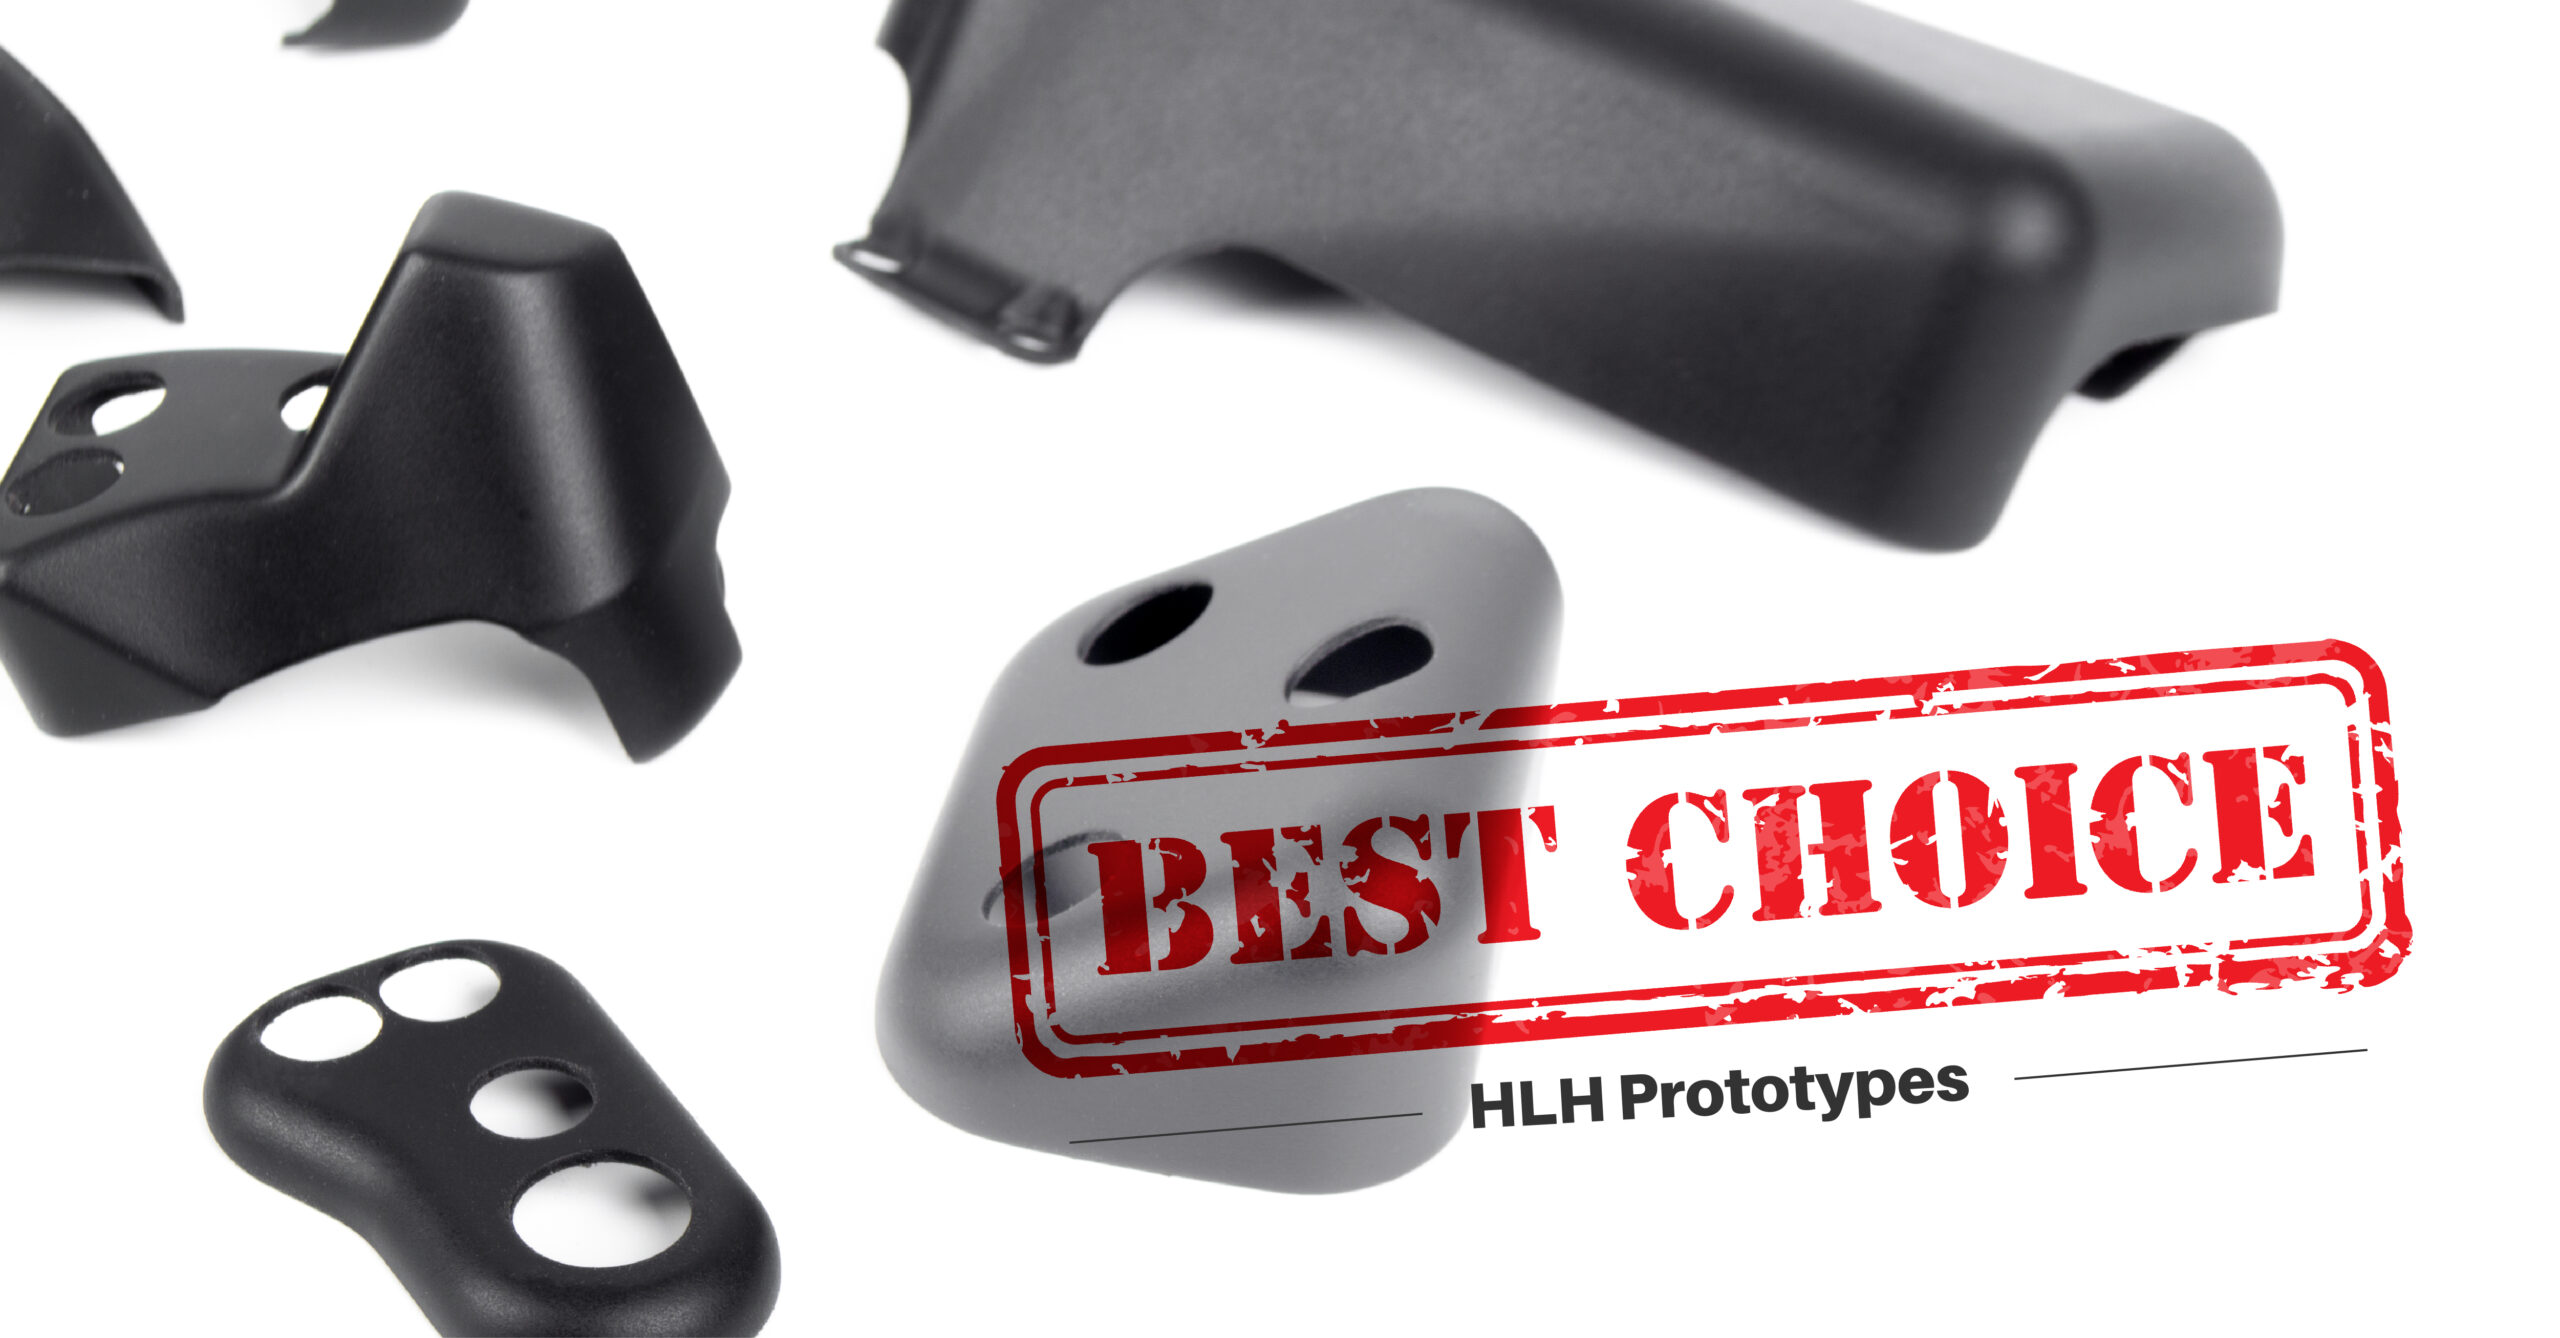 Looking for Cast Urethane Parts? HLH Prototypes is the Best Place For You